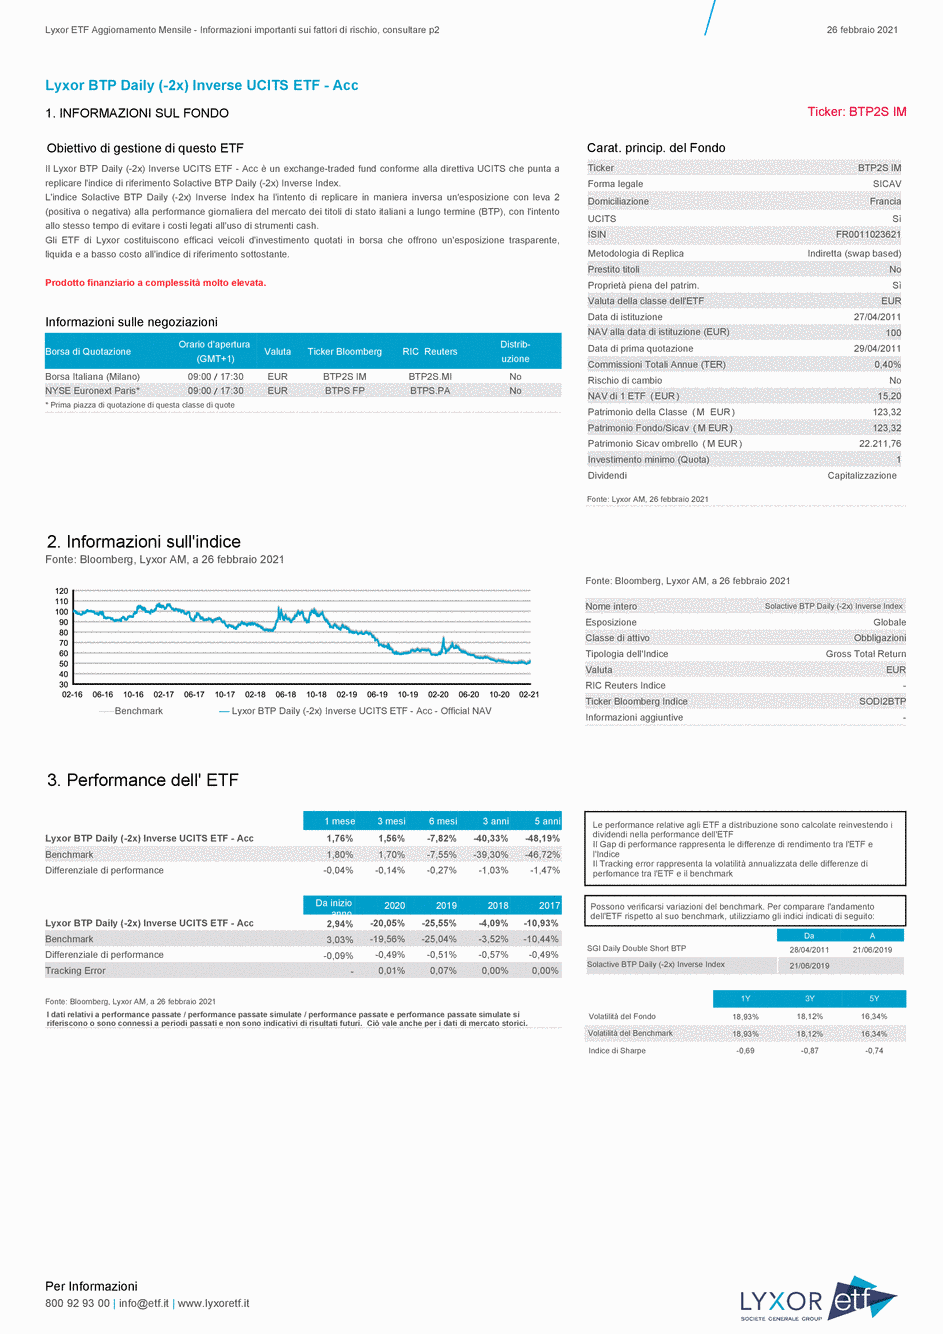 Reporting Lyxor BTP Daily (-2x) Inverse UCITS ETF - Acc - 26/02/2021 - Italien